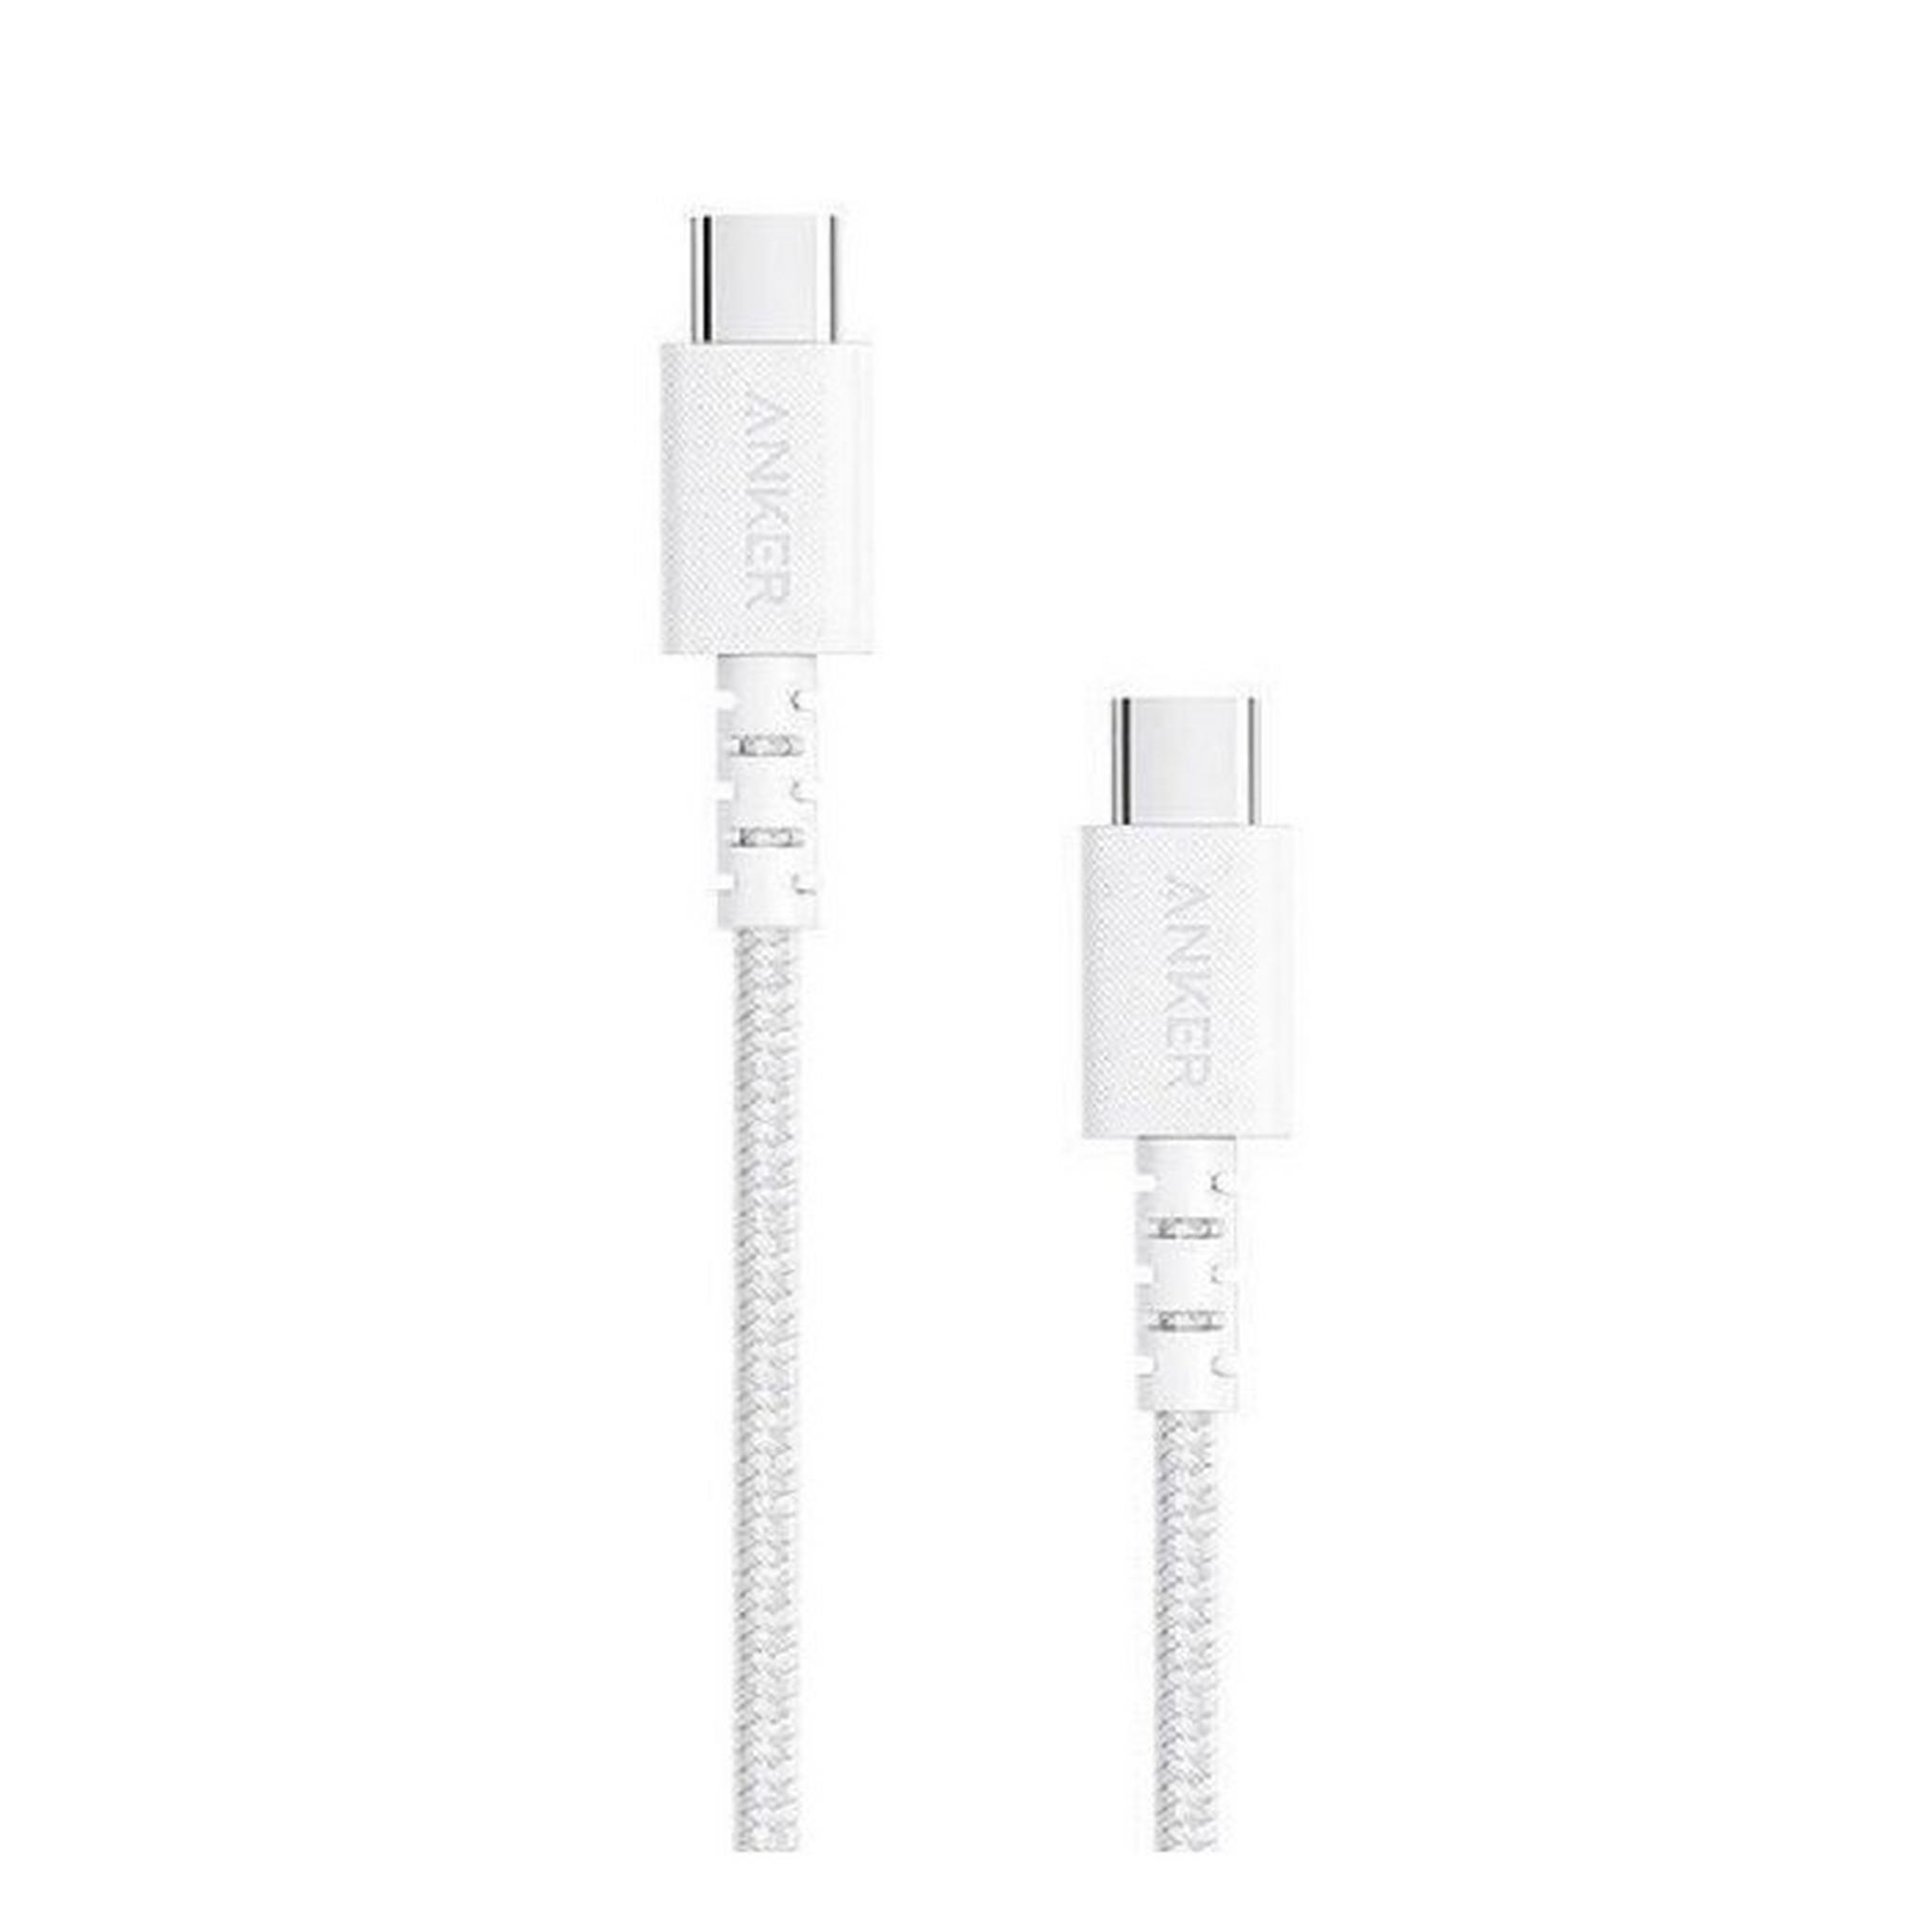 Anker Powerline Select + USB C to USB C 3 ft Cable - White